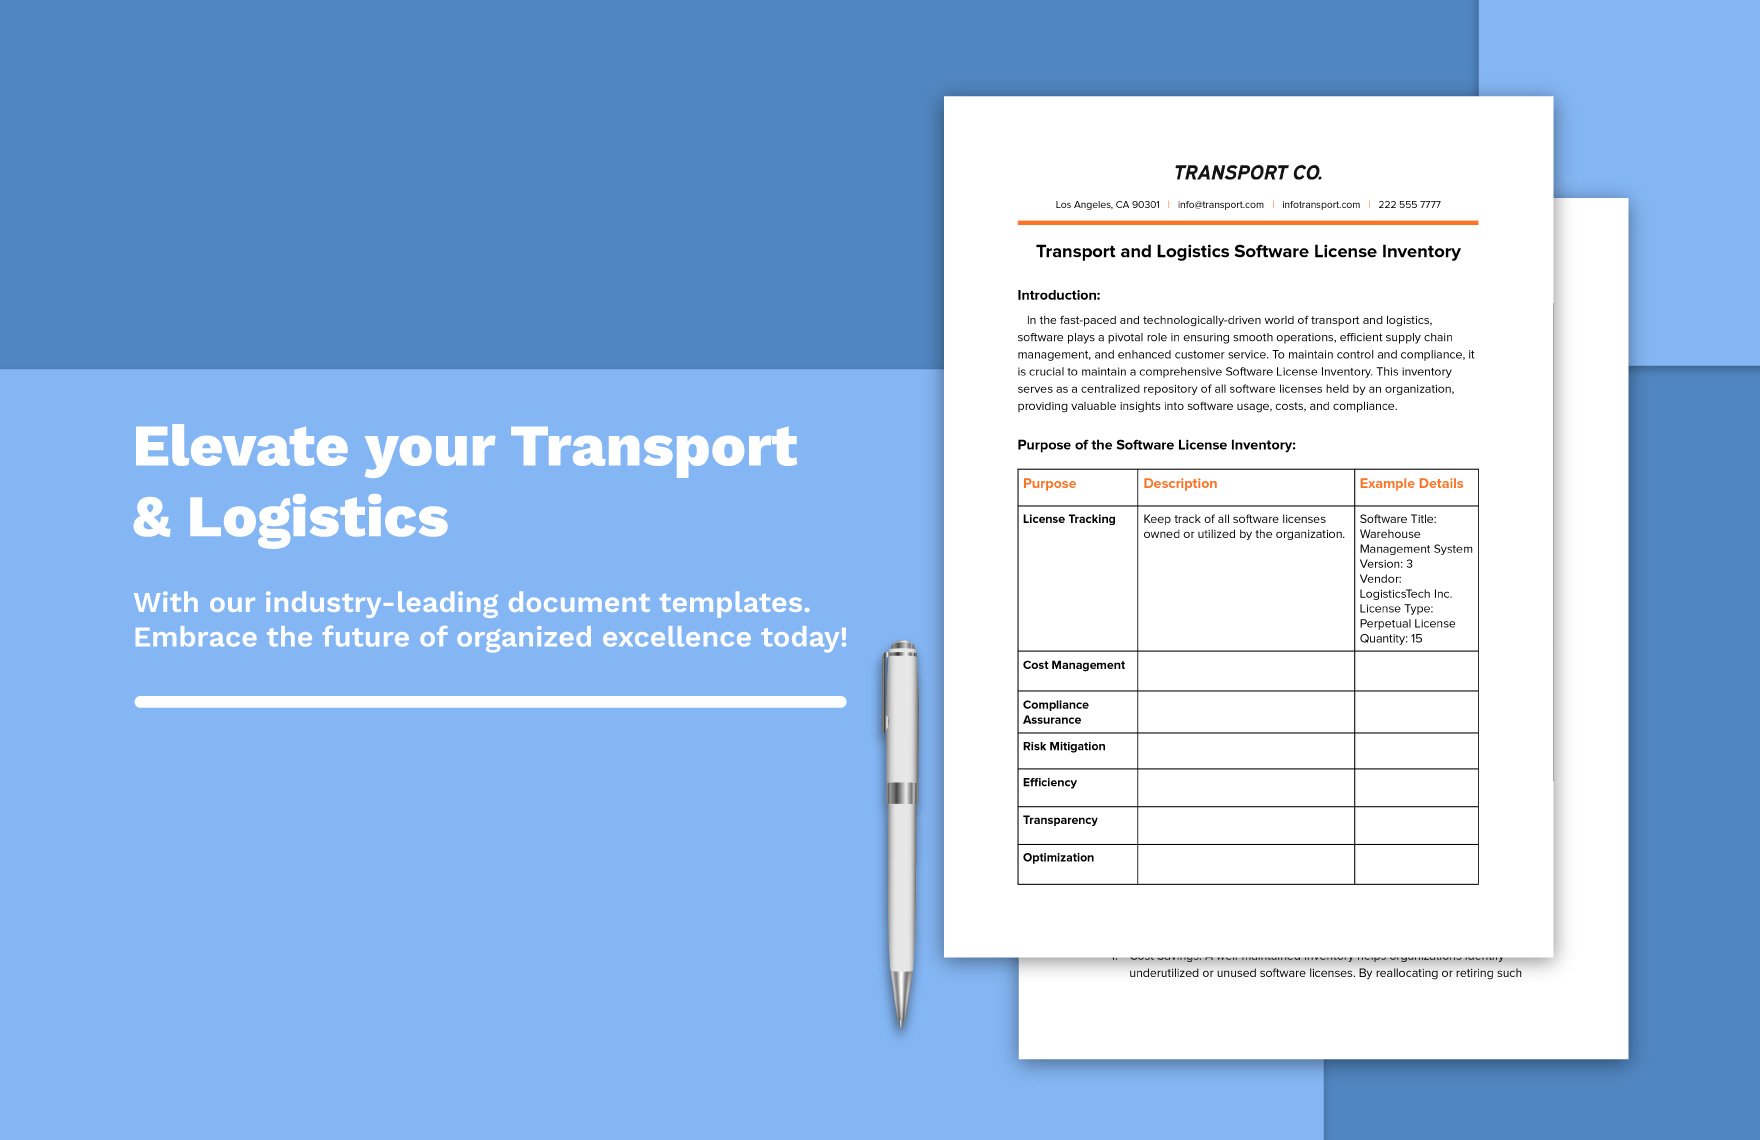 Transport and Logistics Software License Inventory Template